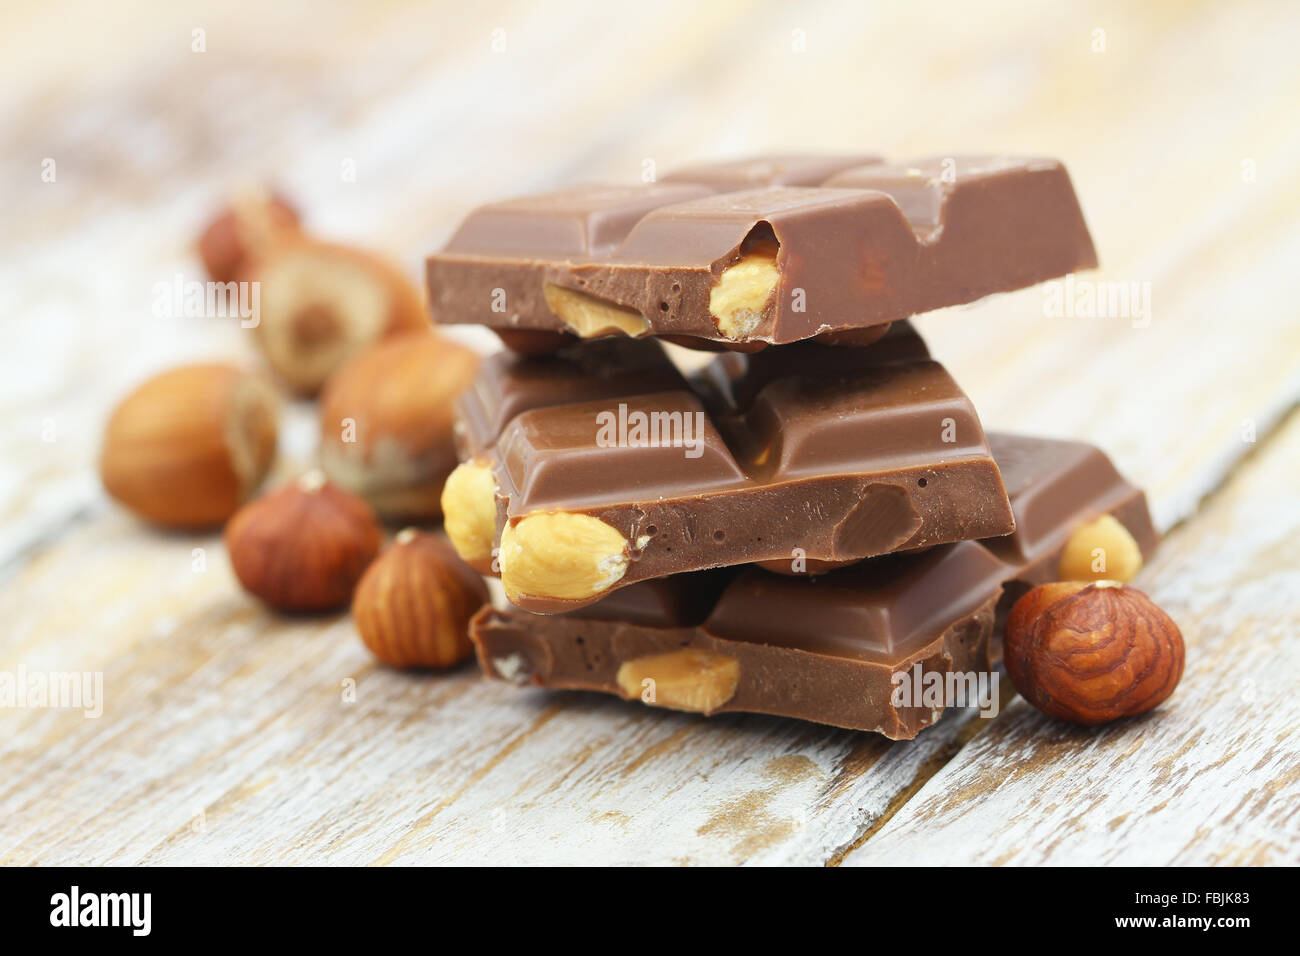 Milk chocolate pieces with whole hazelnuts on rustic wooden surface Stock Photo